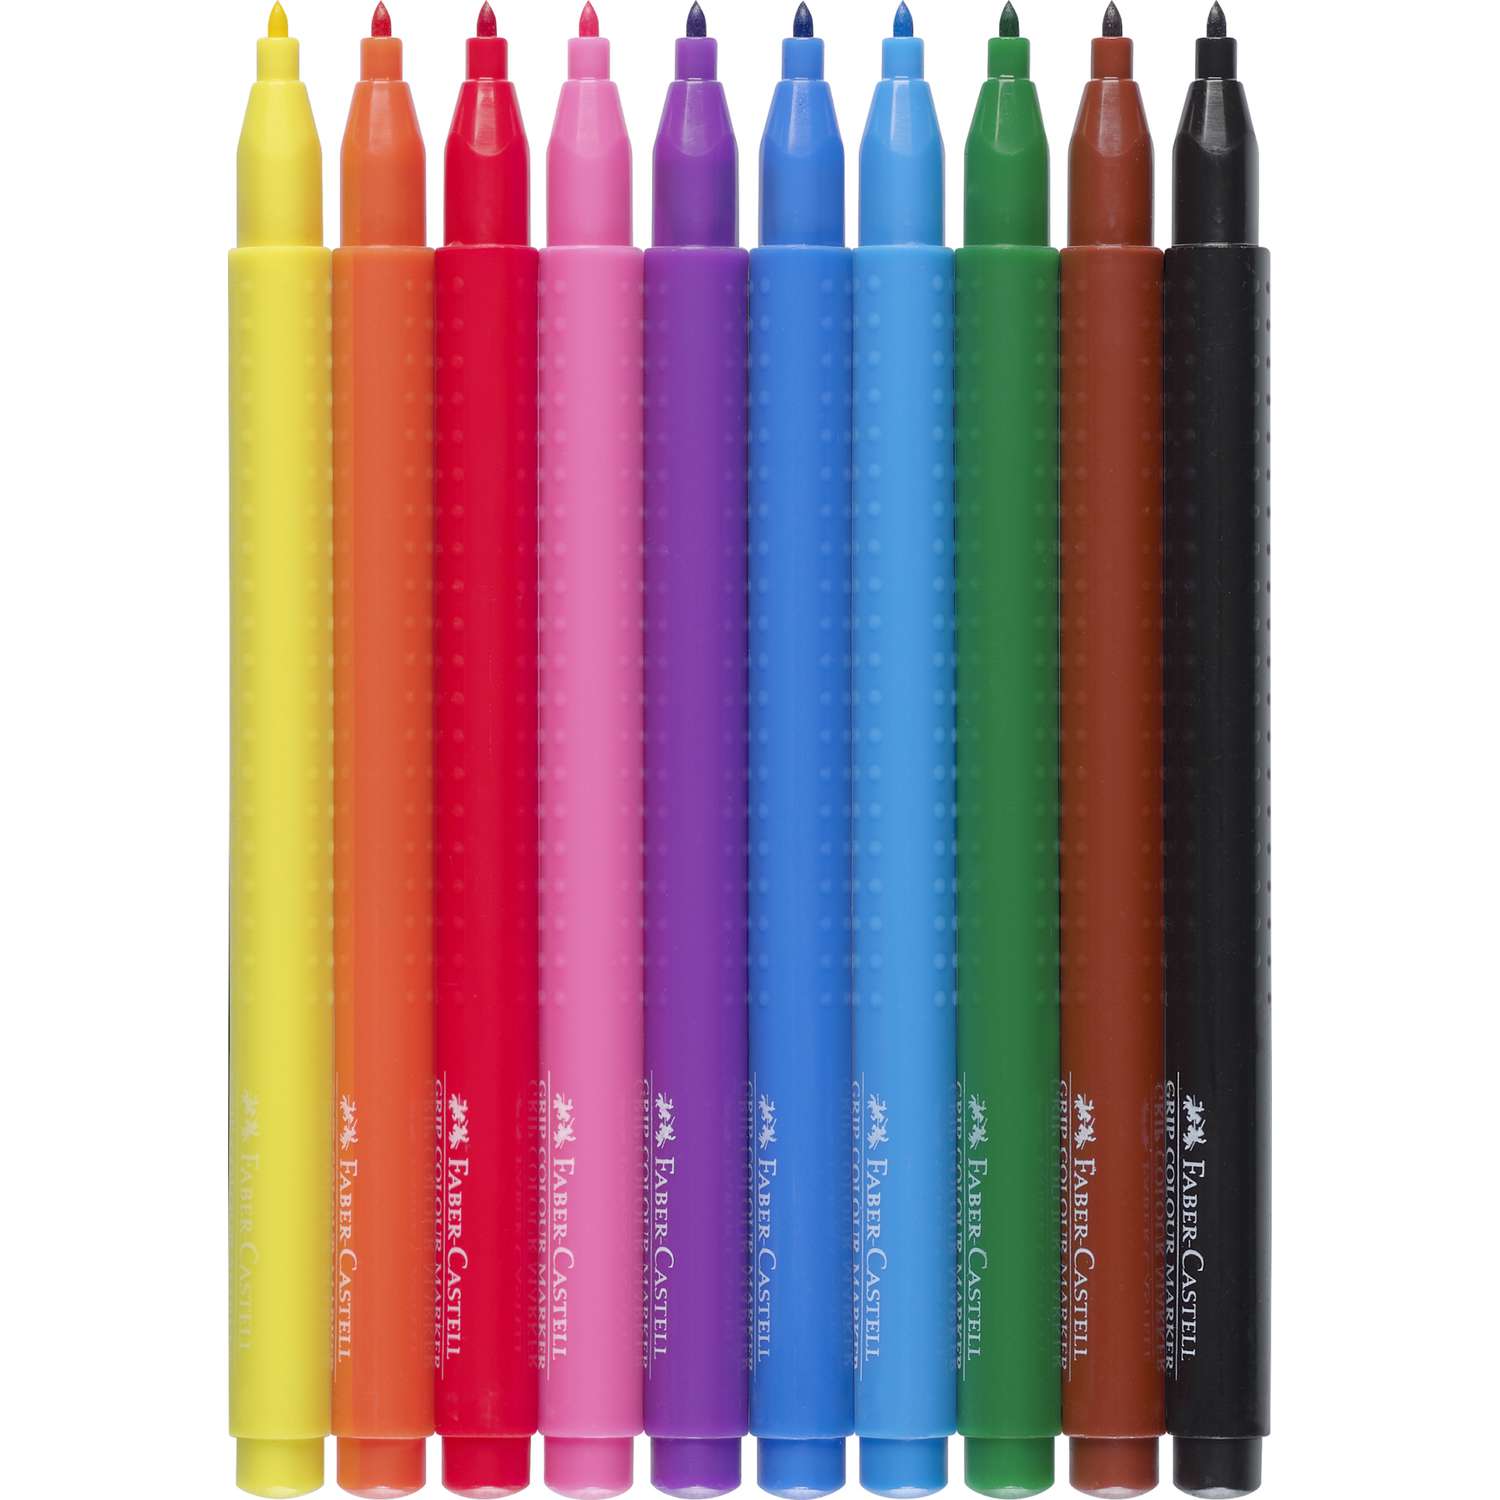 https://images.greatart.co.uk/out/pictures/generated/1500_1500/594615/Faber-Castell+Grip+Color+Marker+Sets%2C+10+pens.jpg